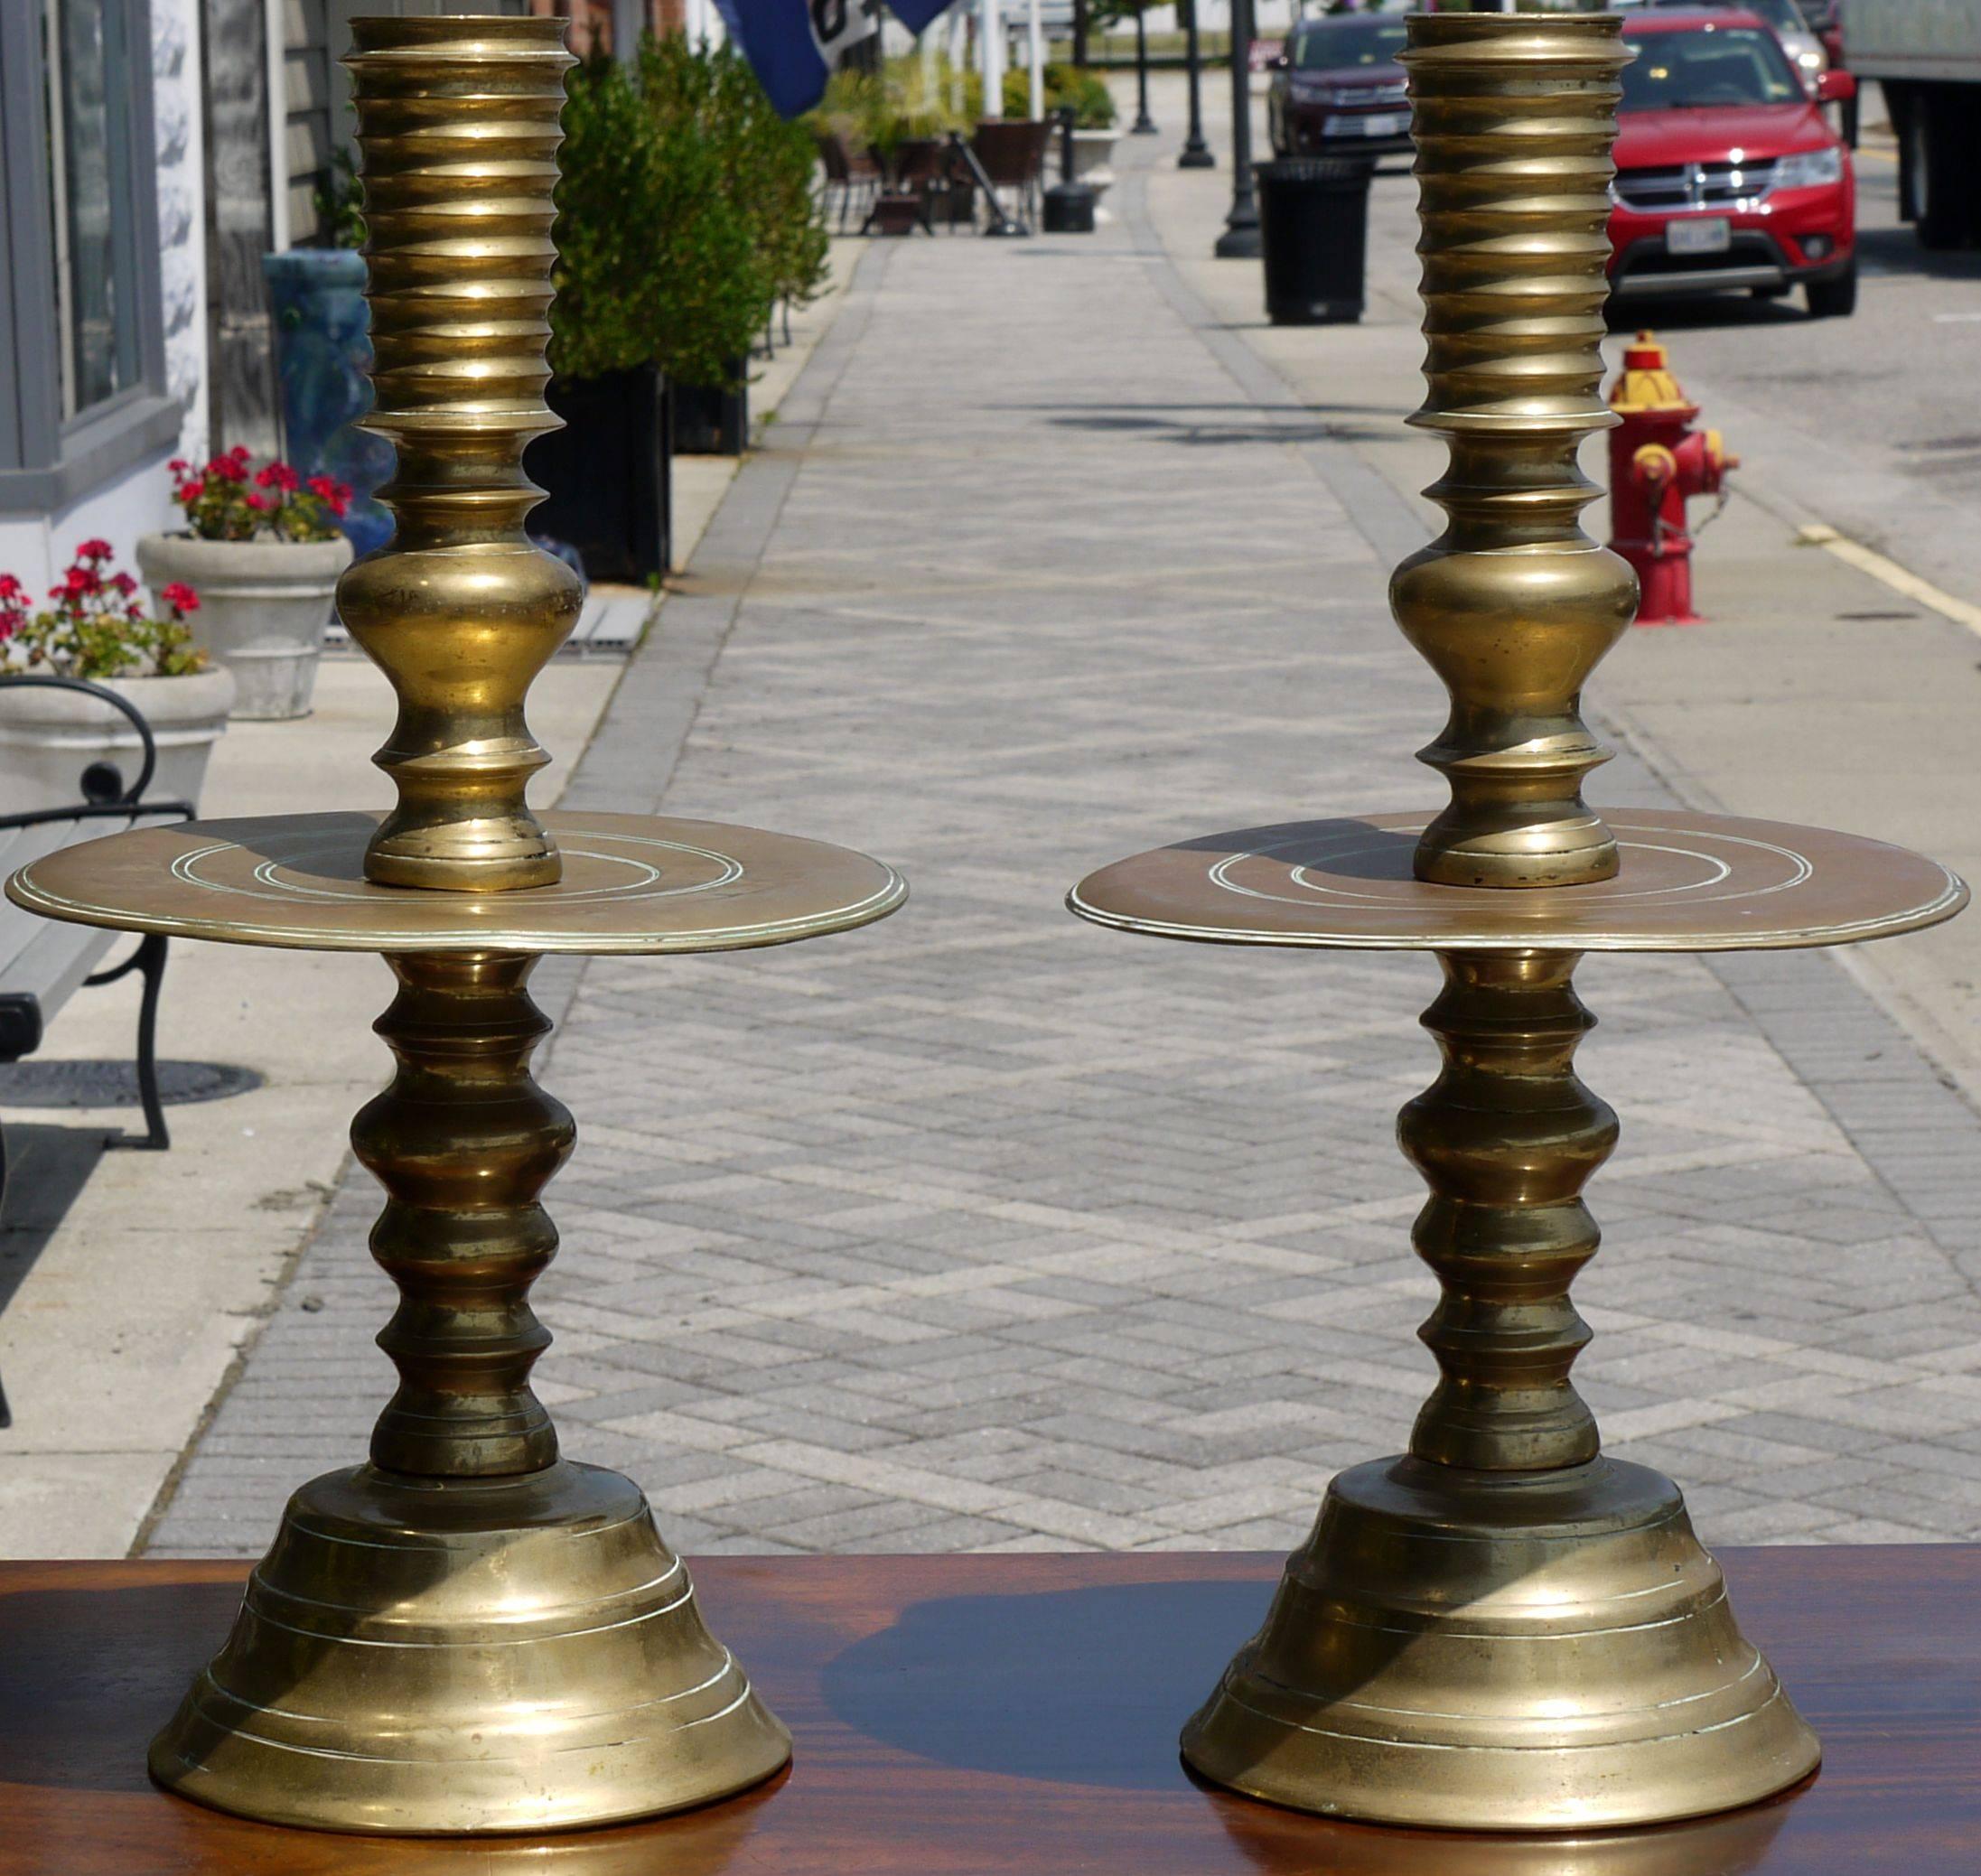 British Colonial Massive Pair of Early 19th Century Brass Candlesticks For Sale